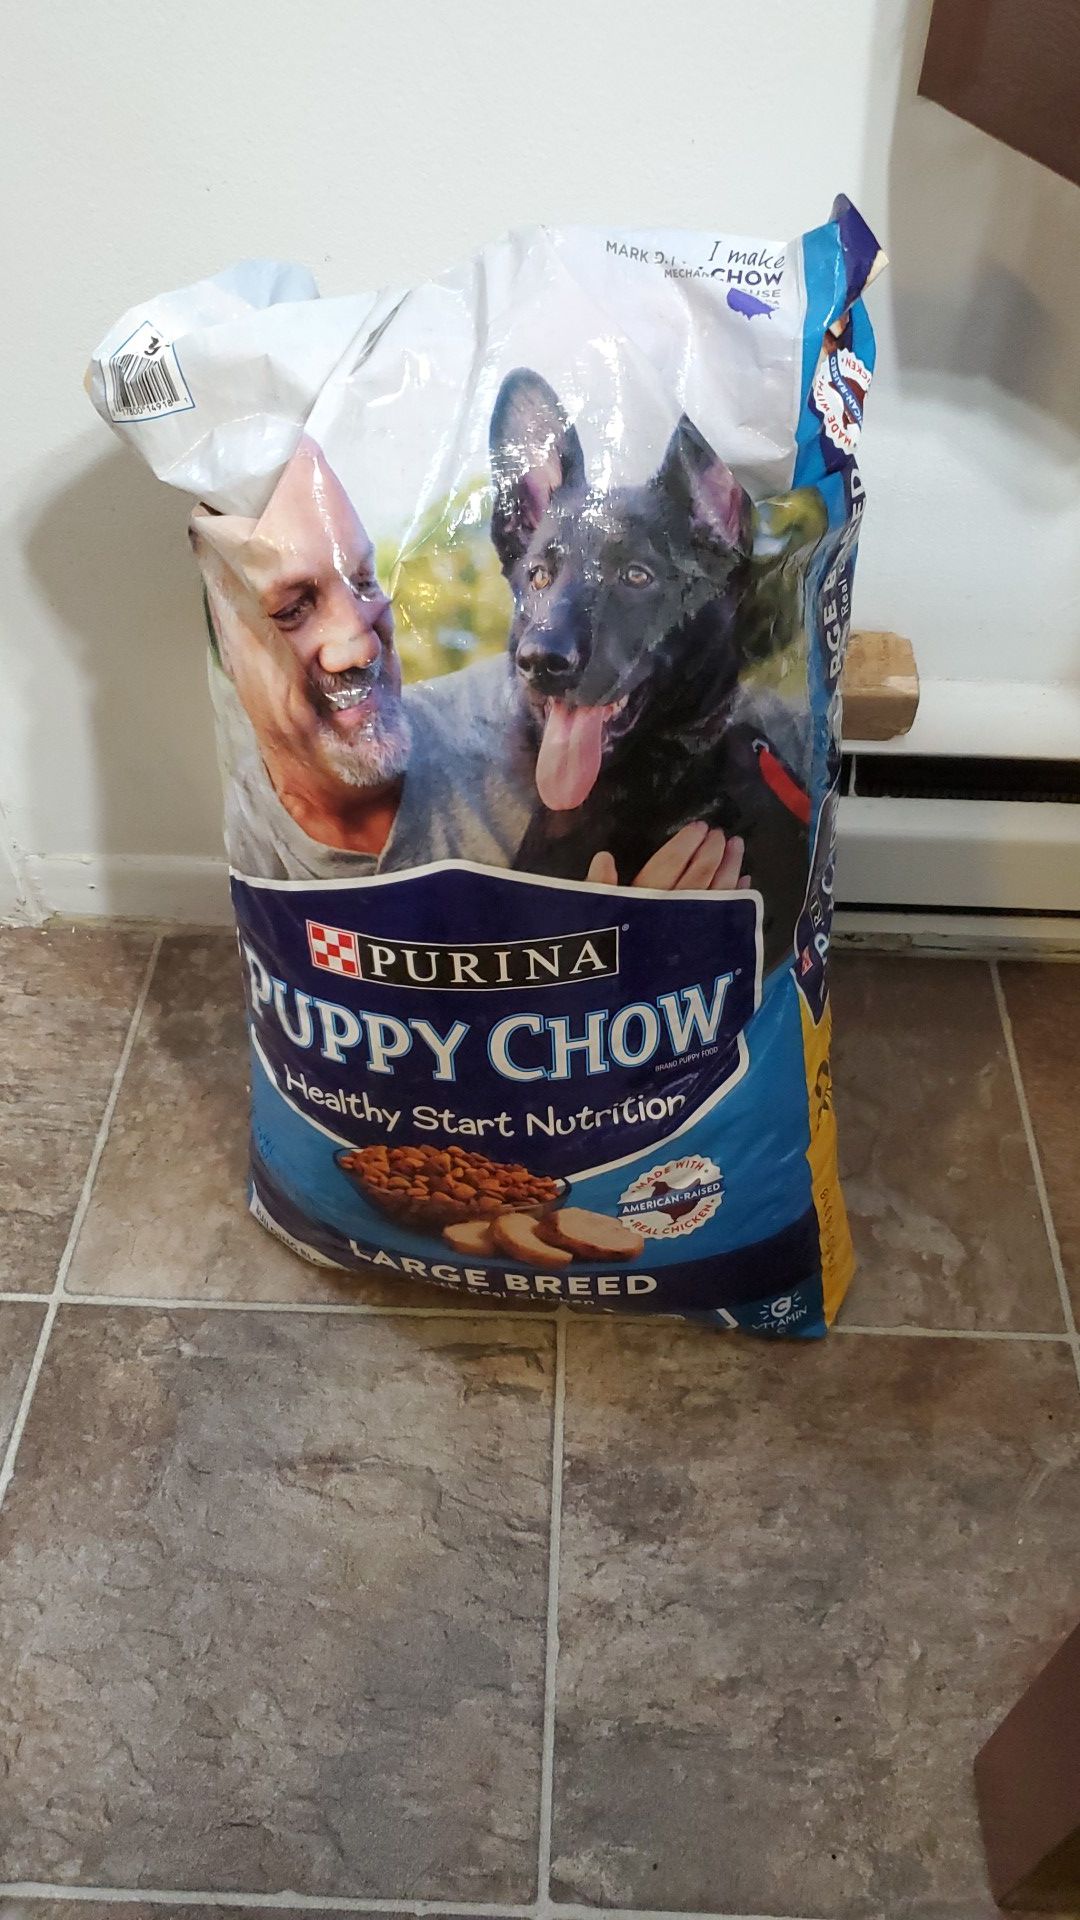 32lb large breed purina puppy chow